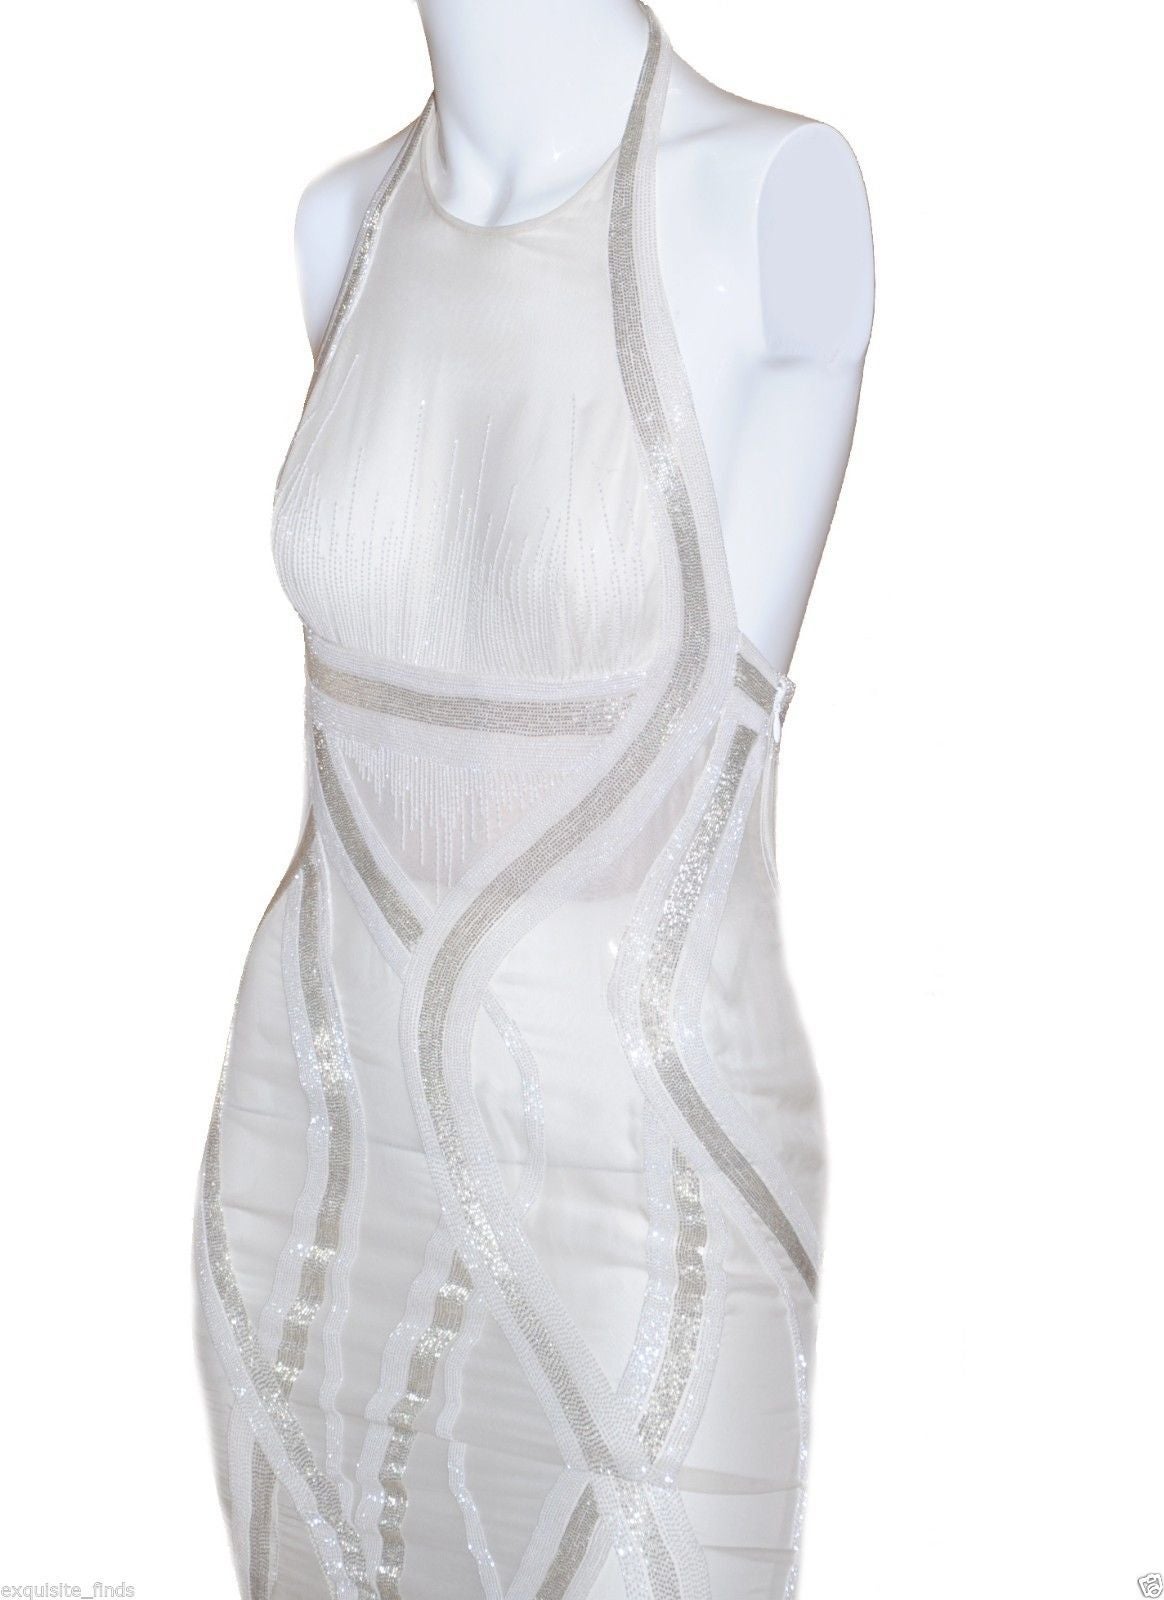 BRAND NEW VERSACE DRESS

Soft off white color, mermaid design and artfully embellished body with open back - ensure a stunning silhouette. 

Size 40

Made in Italy

New, with tags